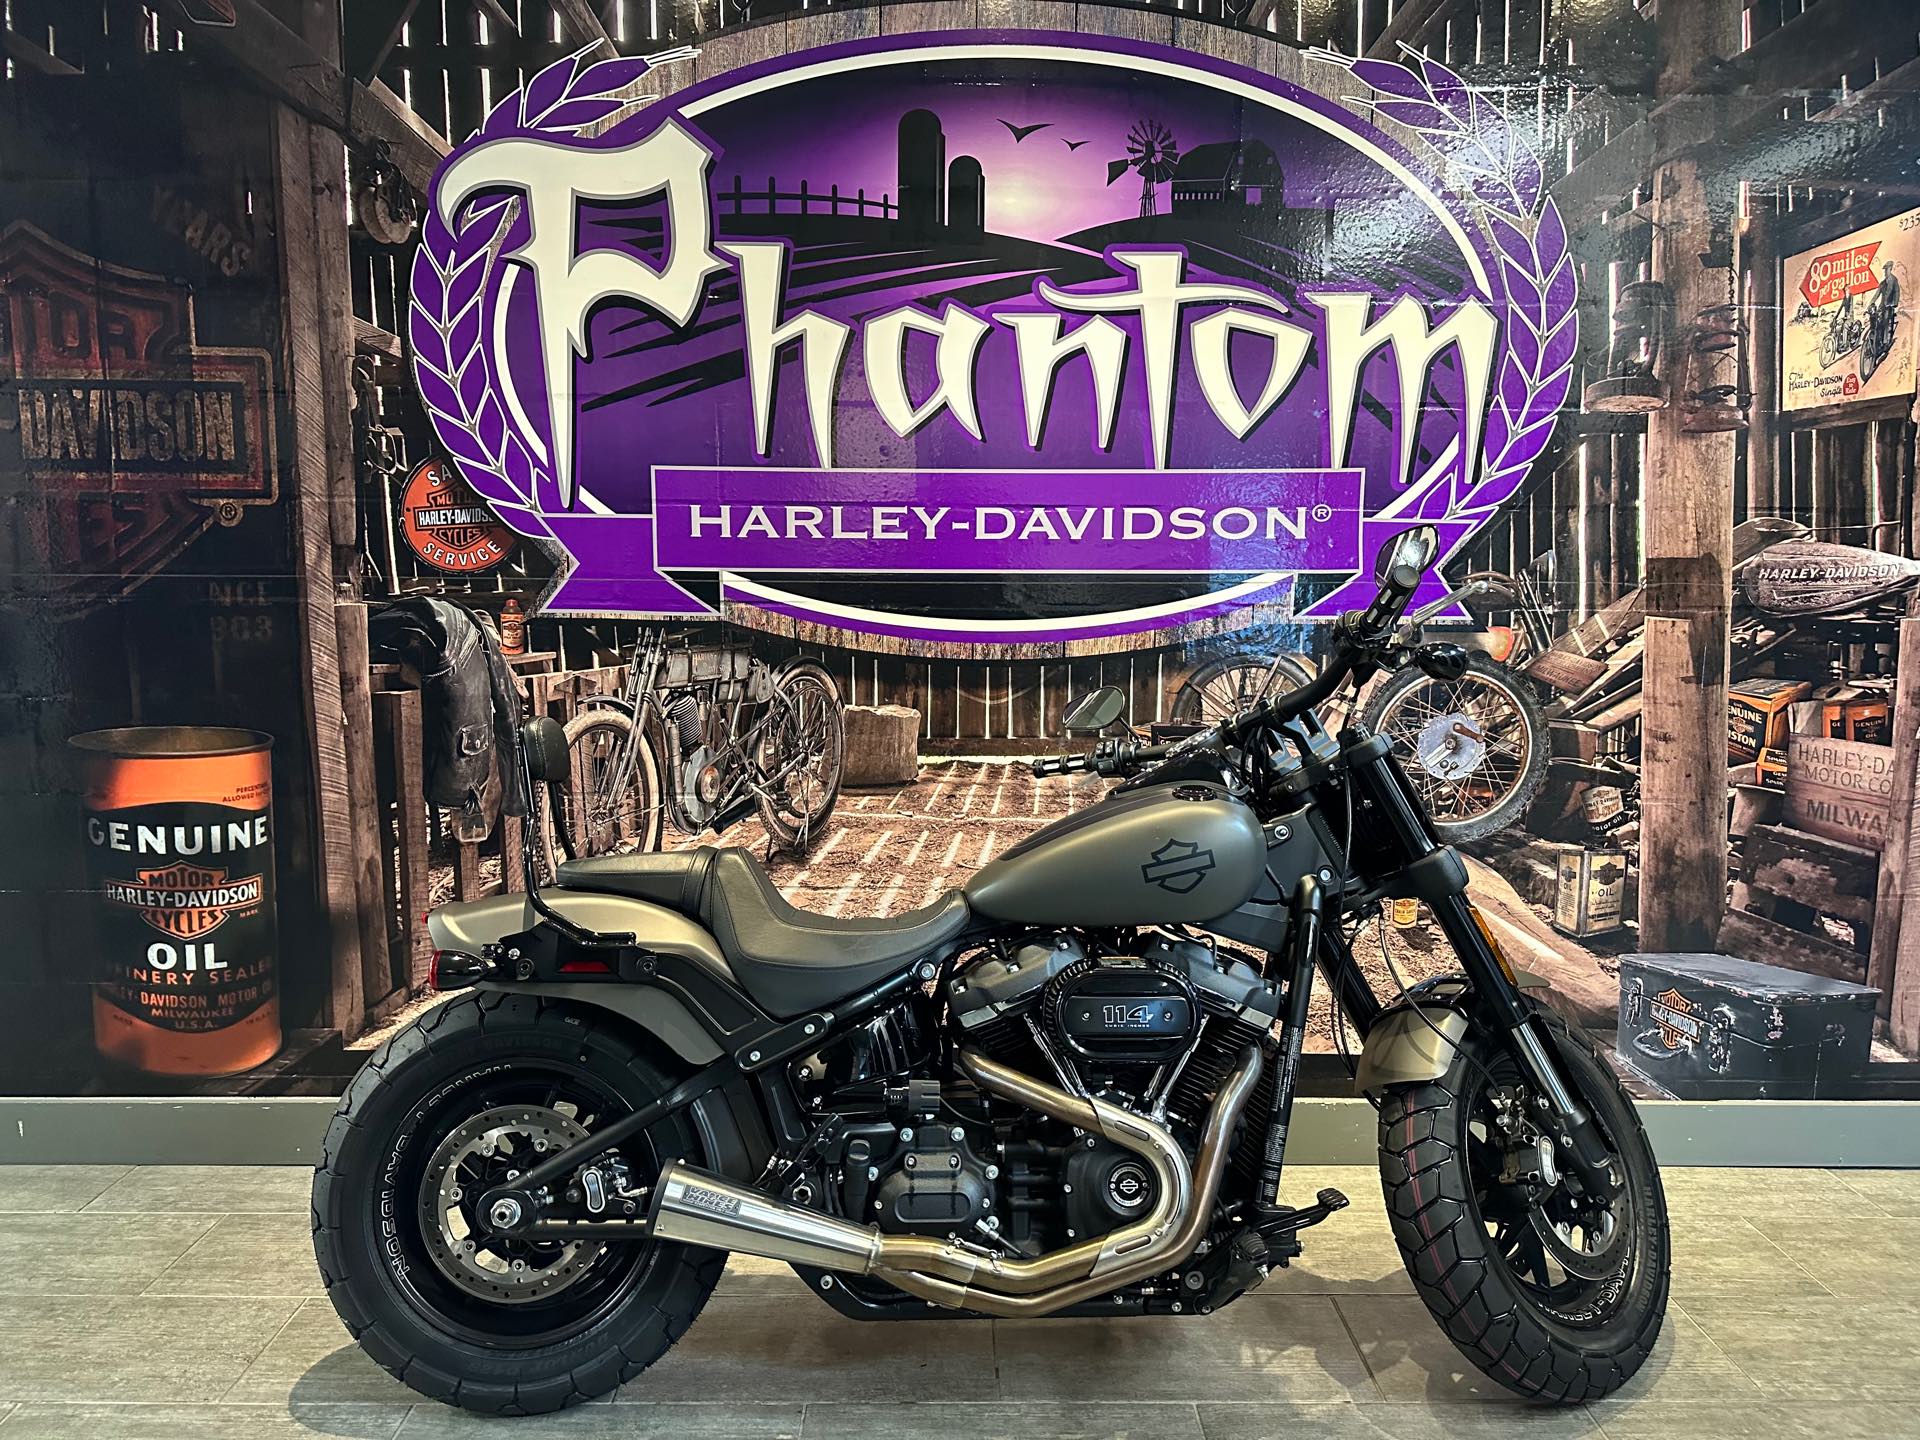 Our Pre-Owned Harley-Davidson cruiser Inventory